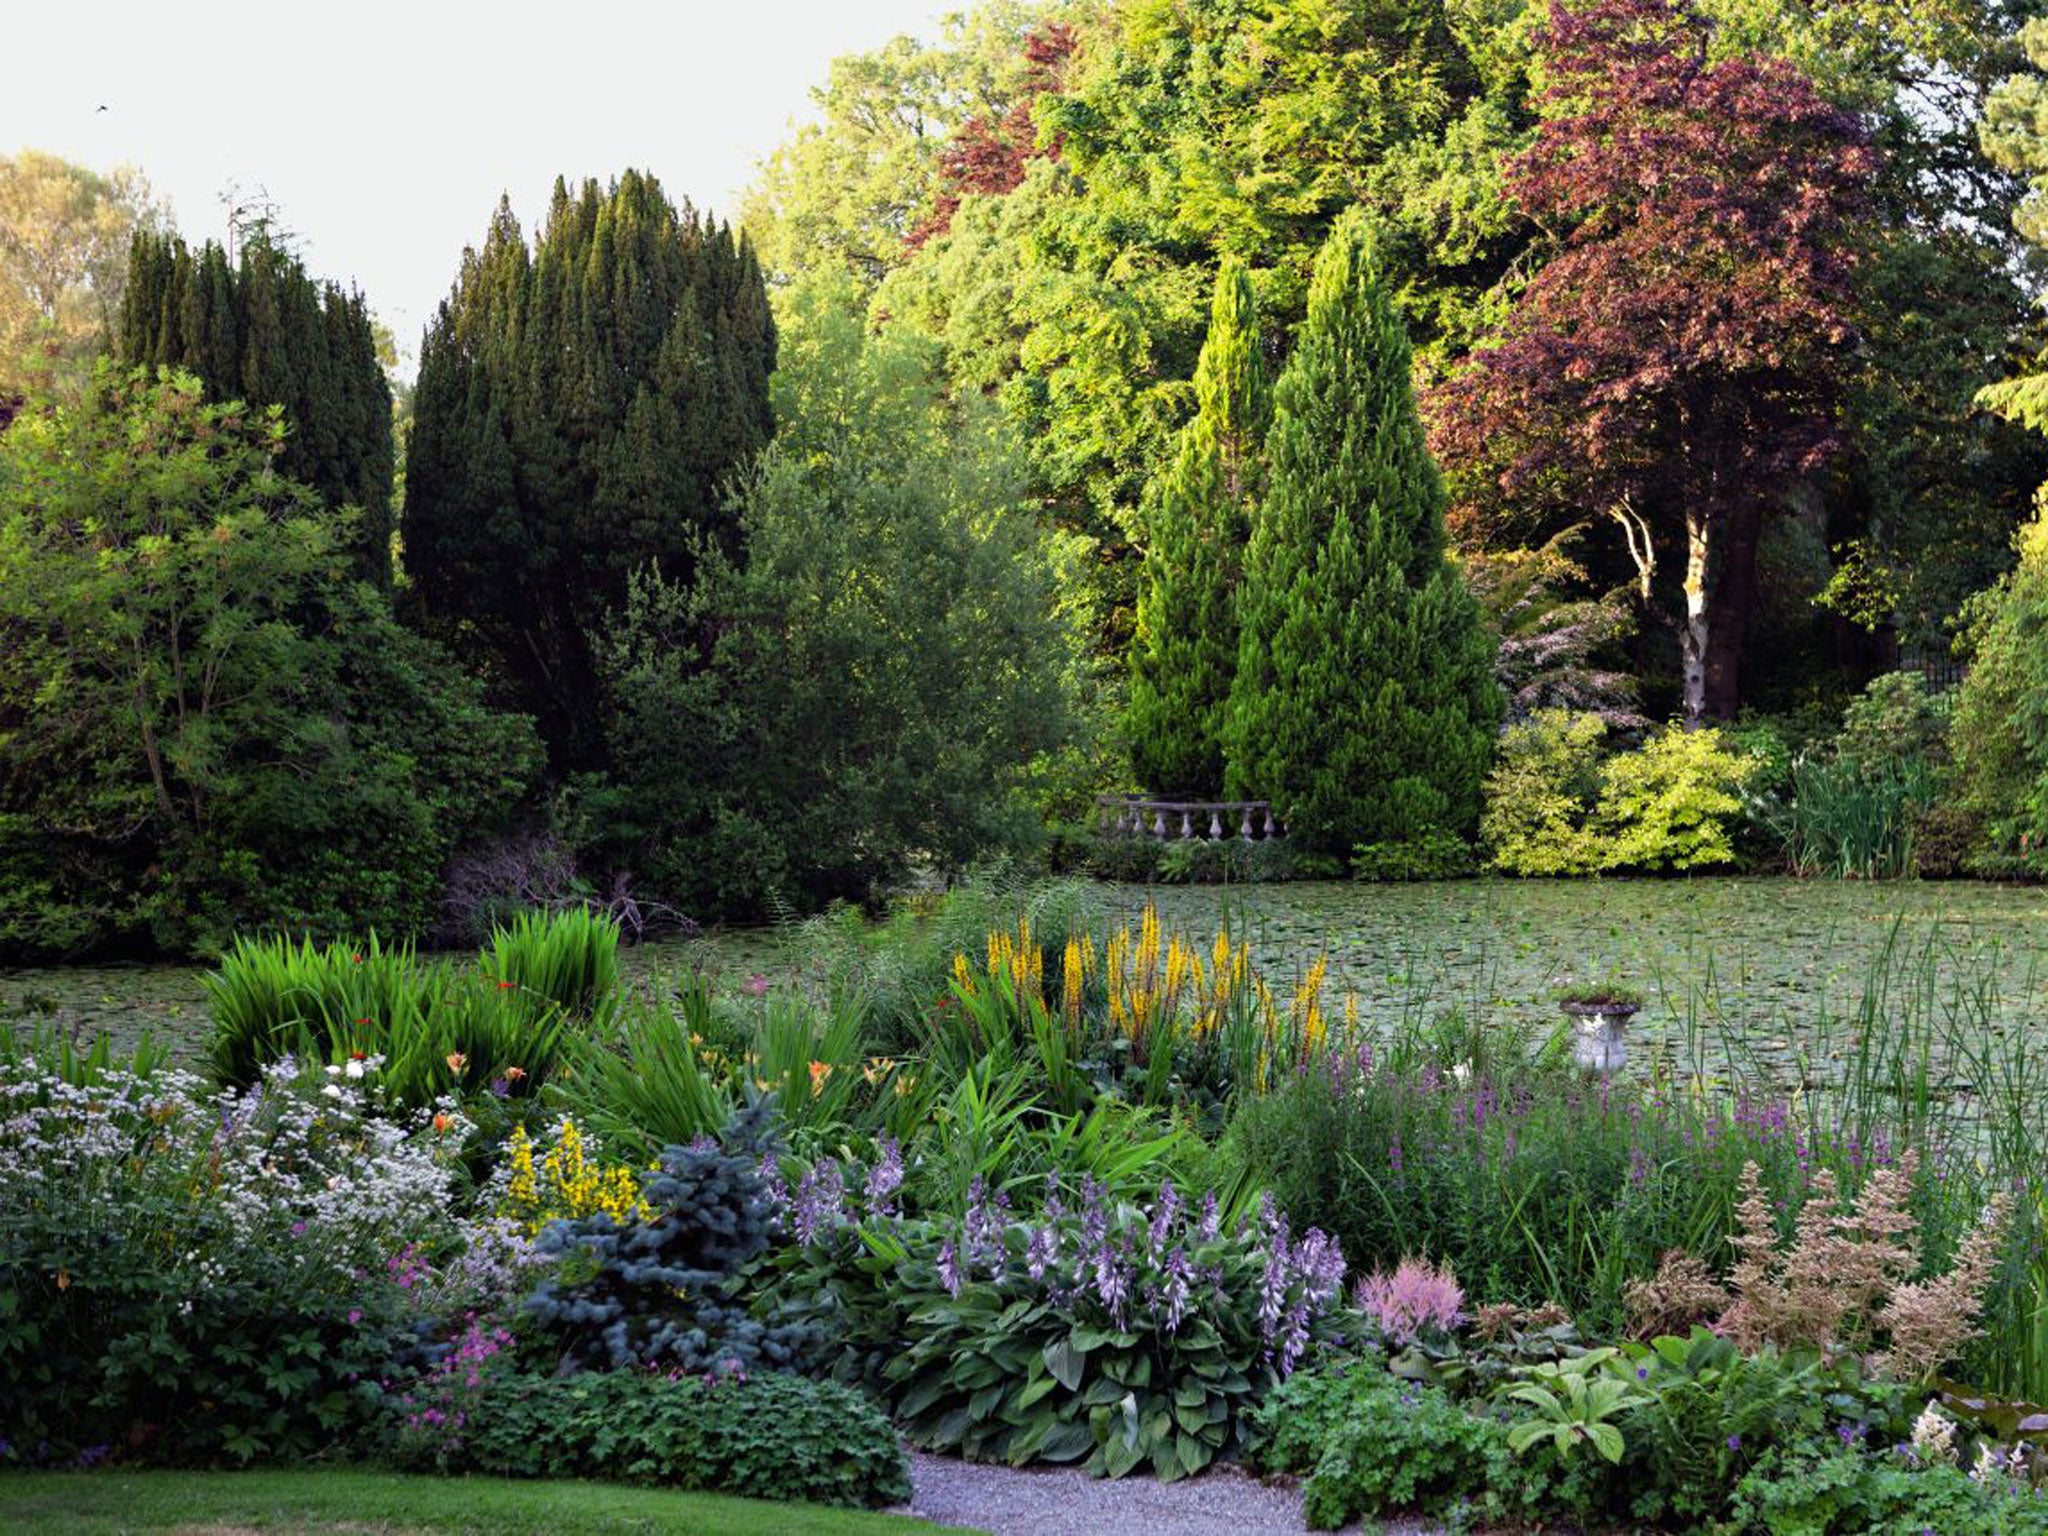 Altamont Gardens: home to rare plants, ancient oaks and sumptuous landscaping